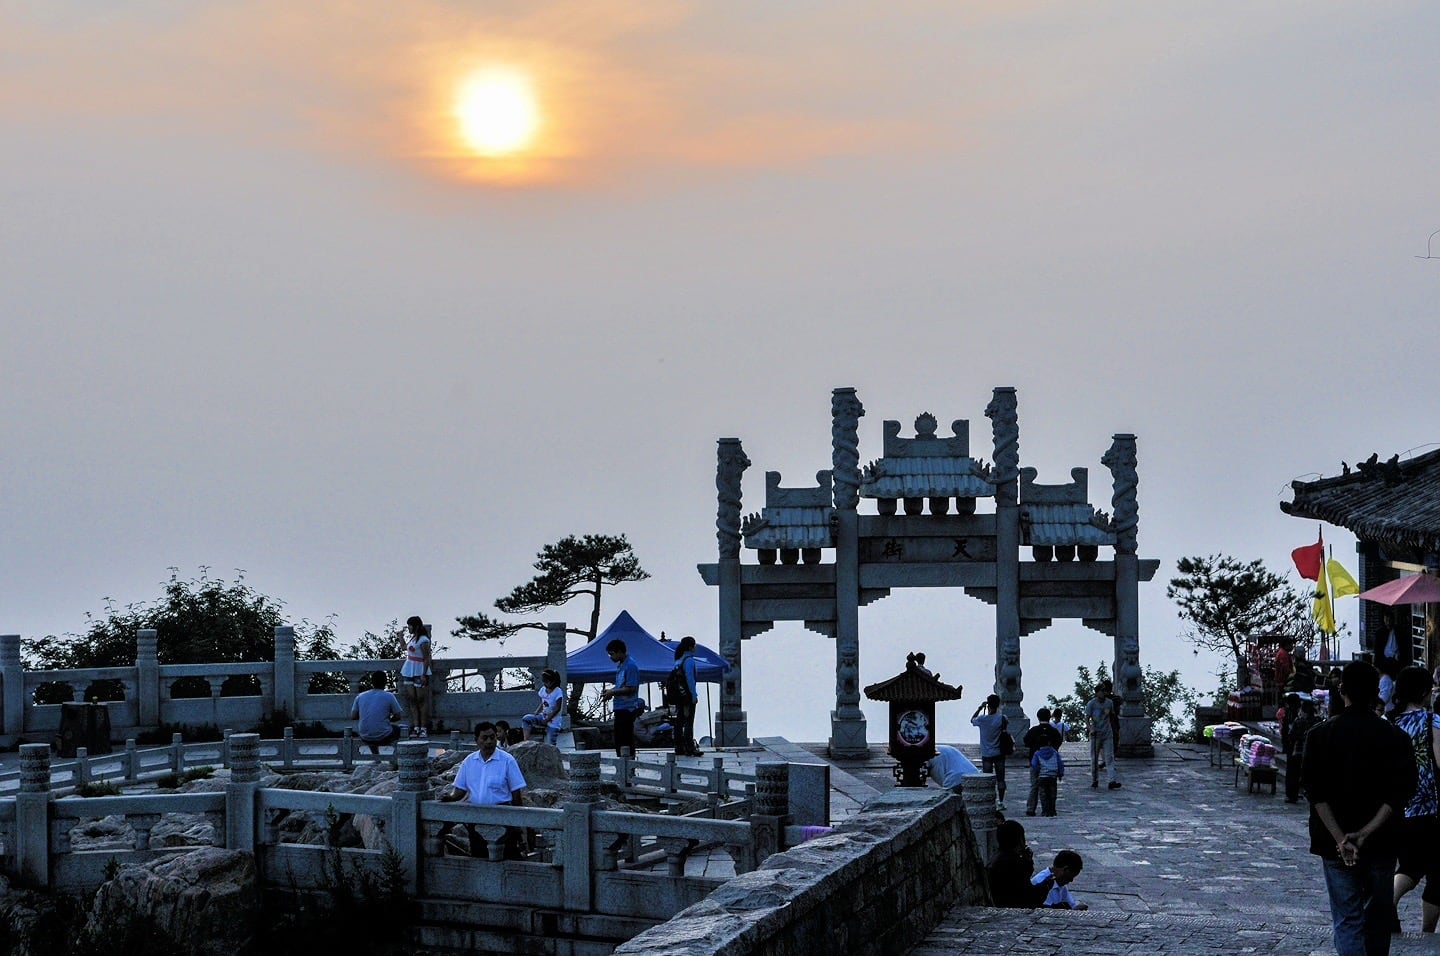 sunset and Chinese archway